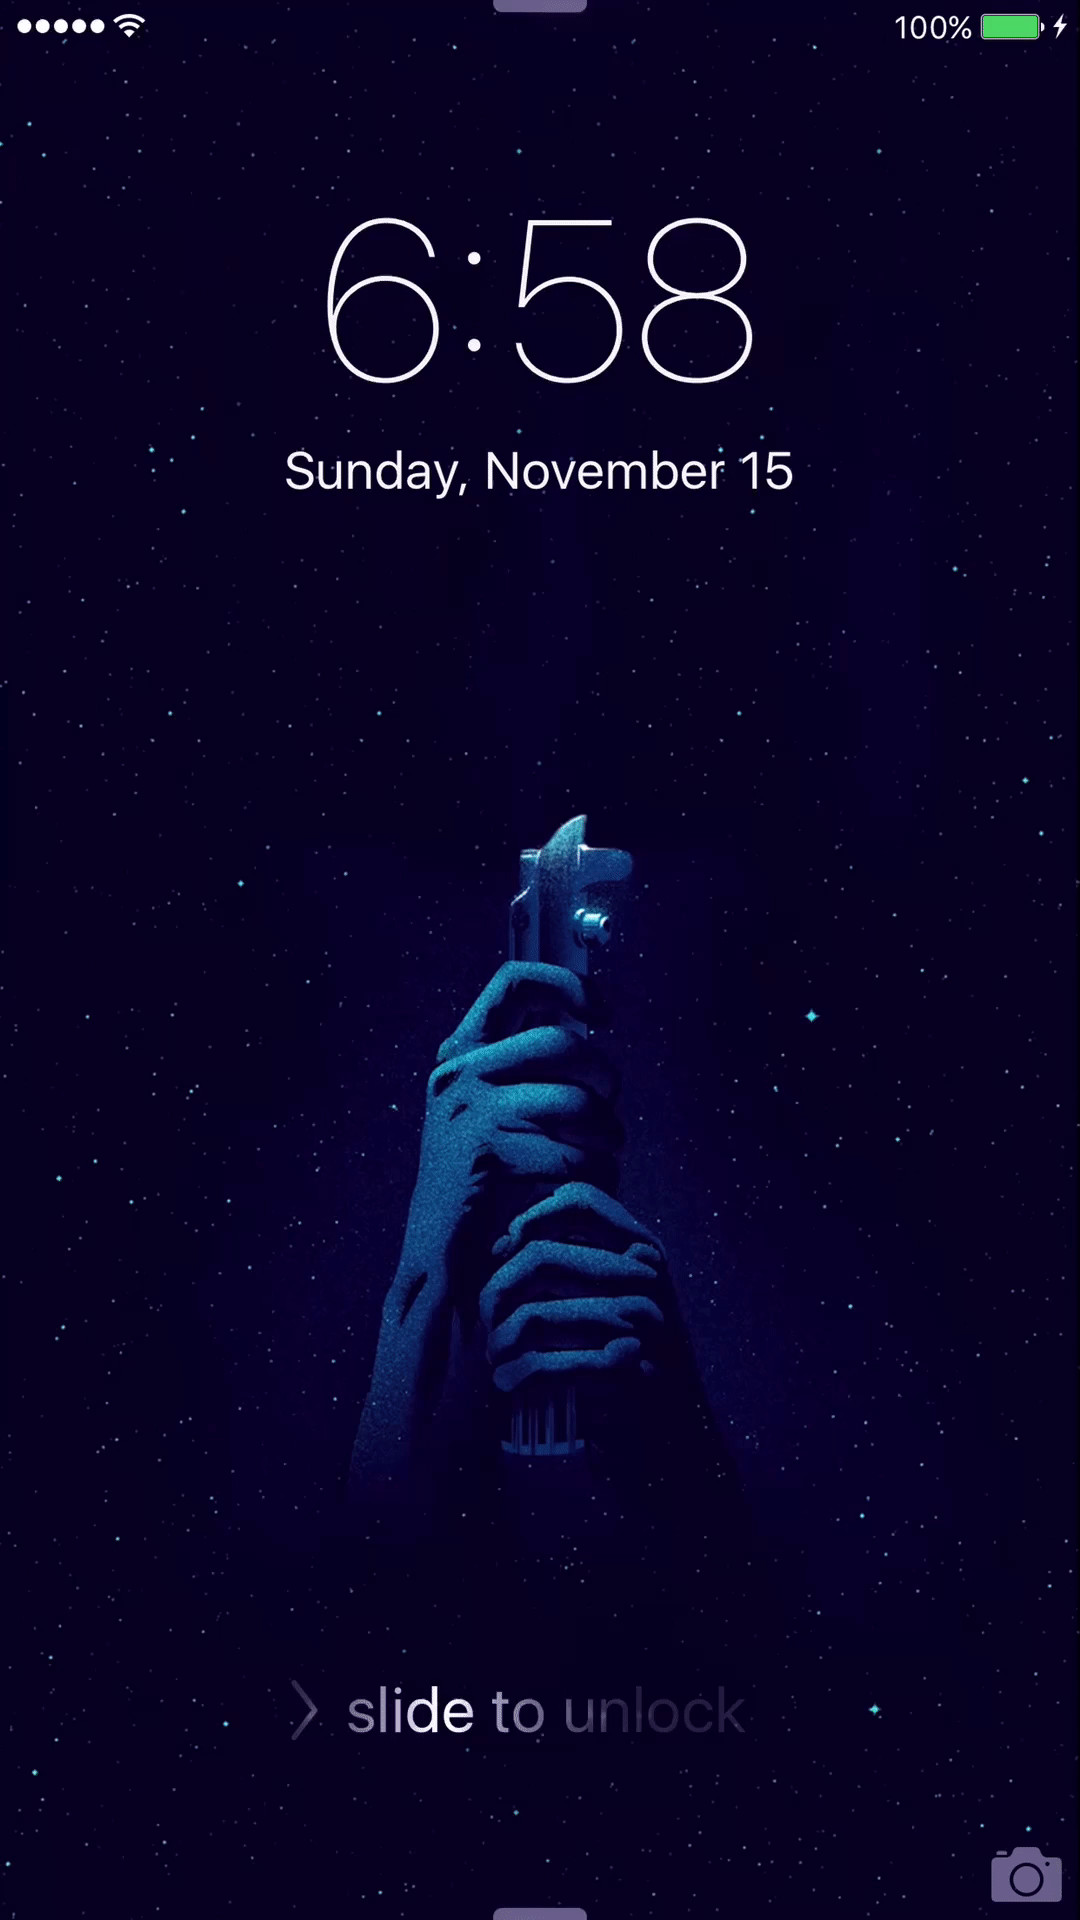 1080x1920 Animated GIF star wars, wallpaper, live, free download iphone, custom,